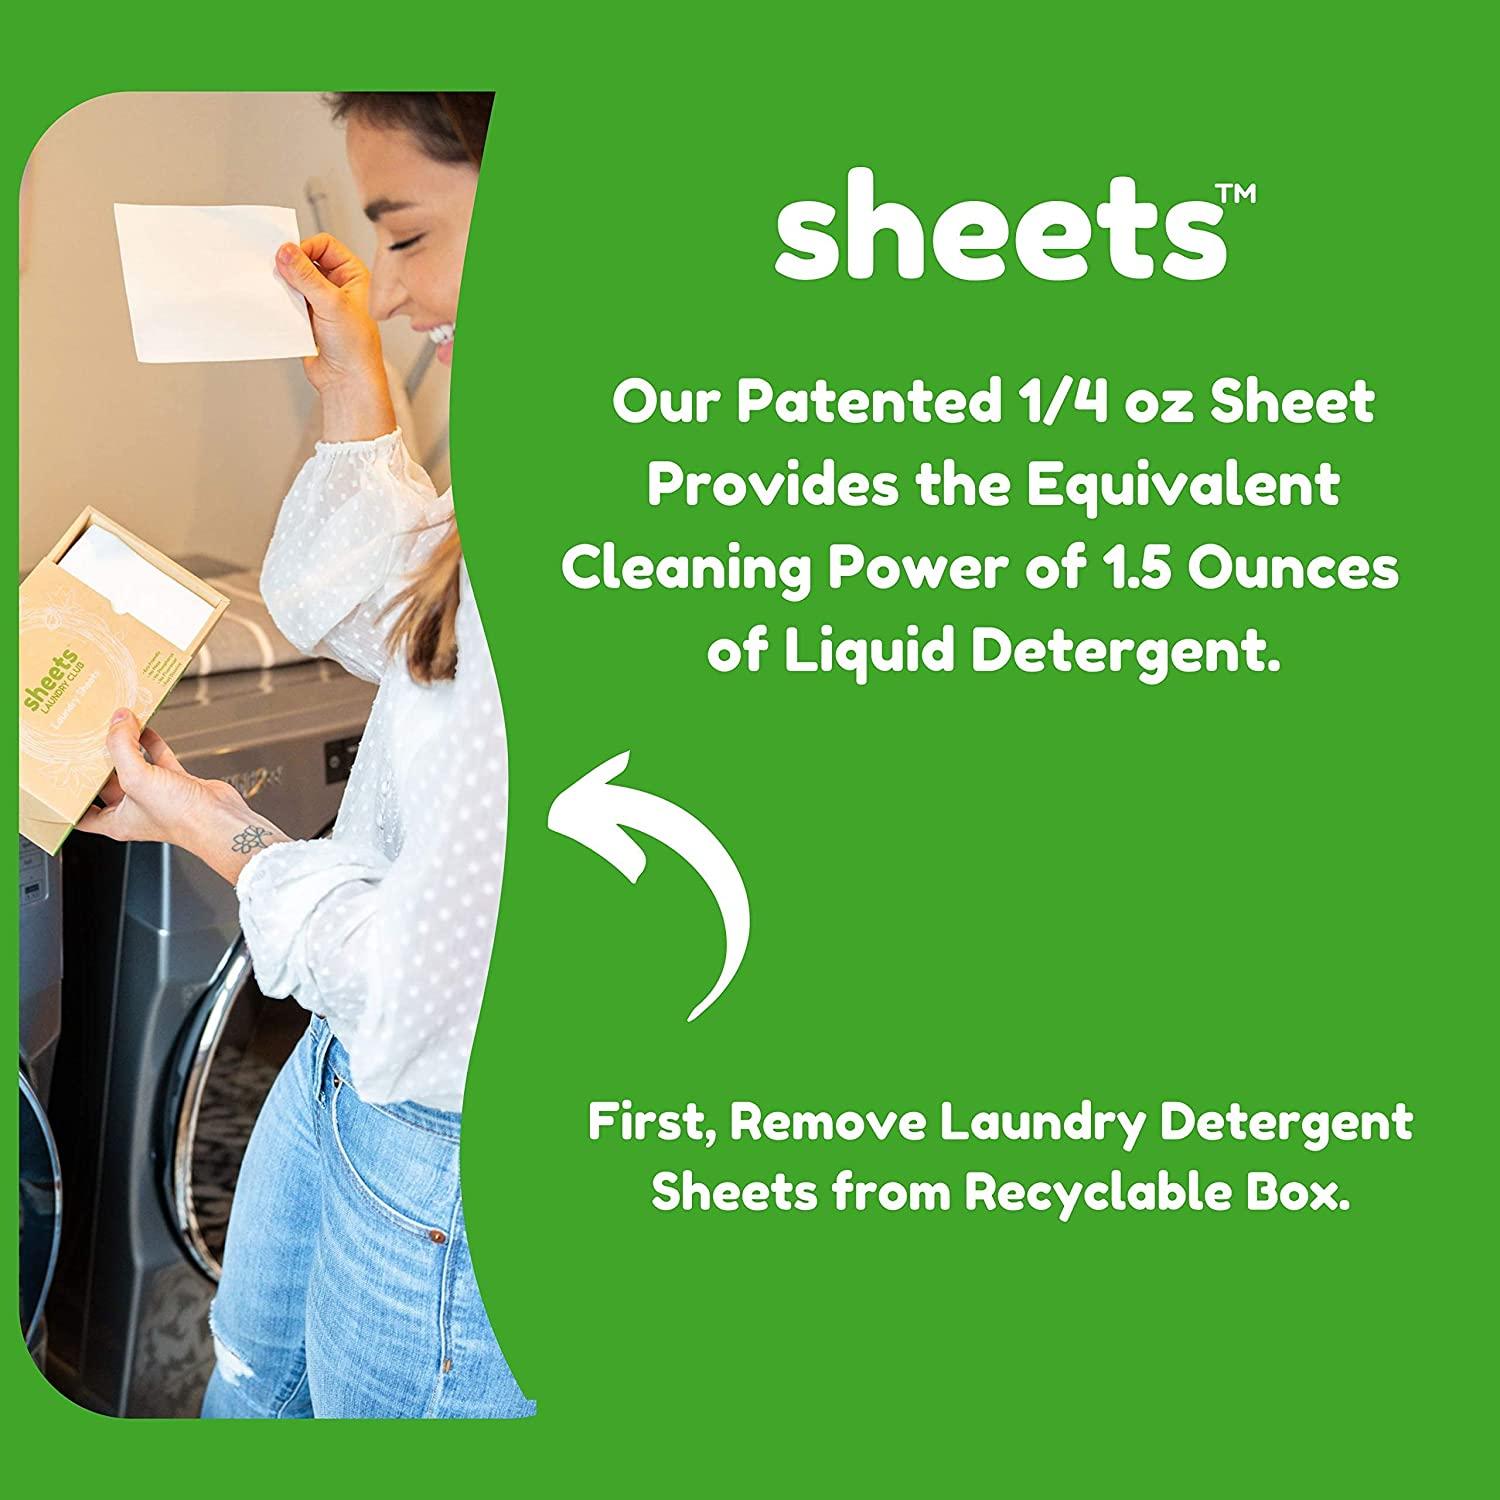 Laundry Detergent Sheets - 50 Sheets (Up To 100 Loads)